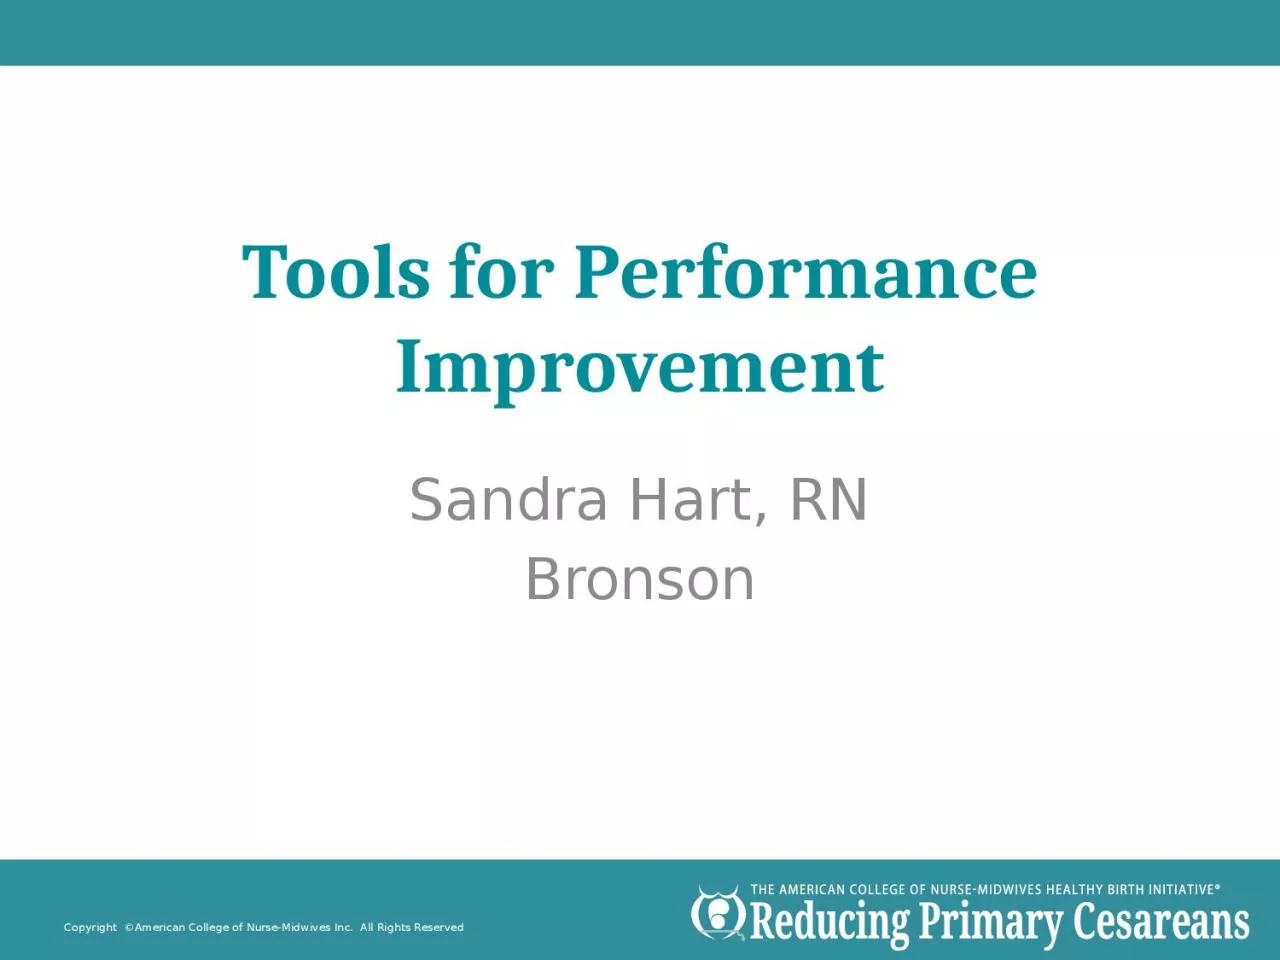 Tools for Performance Improvement